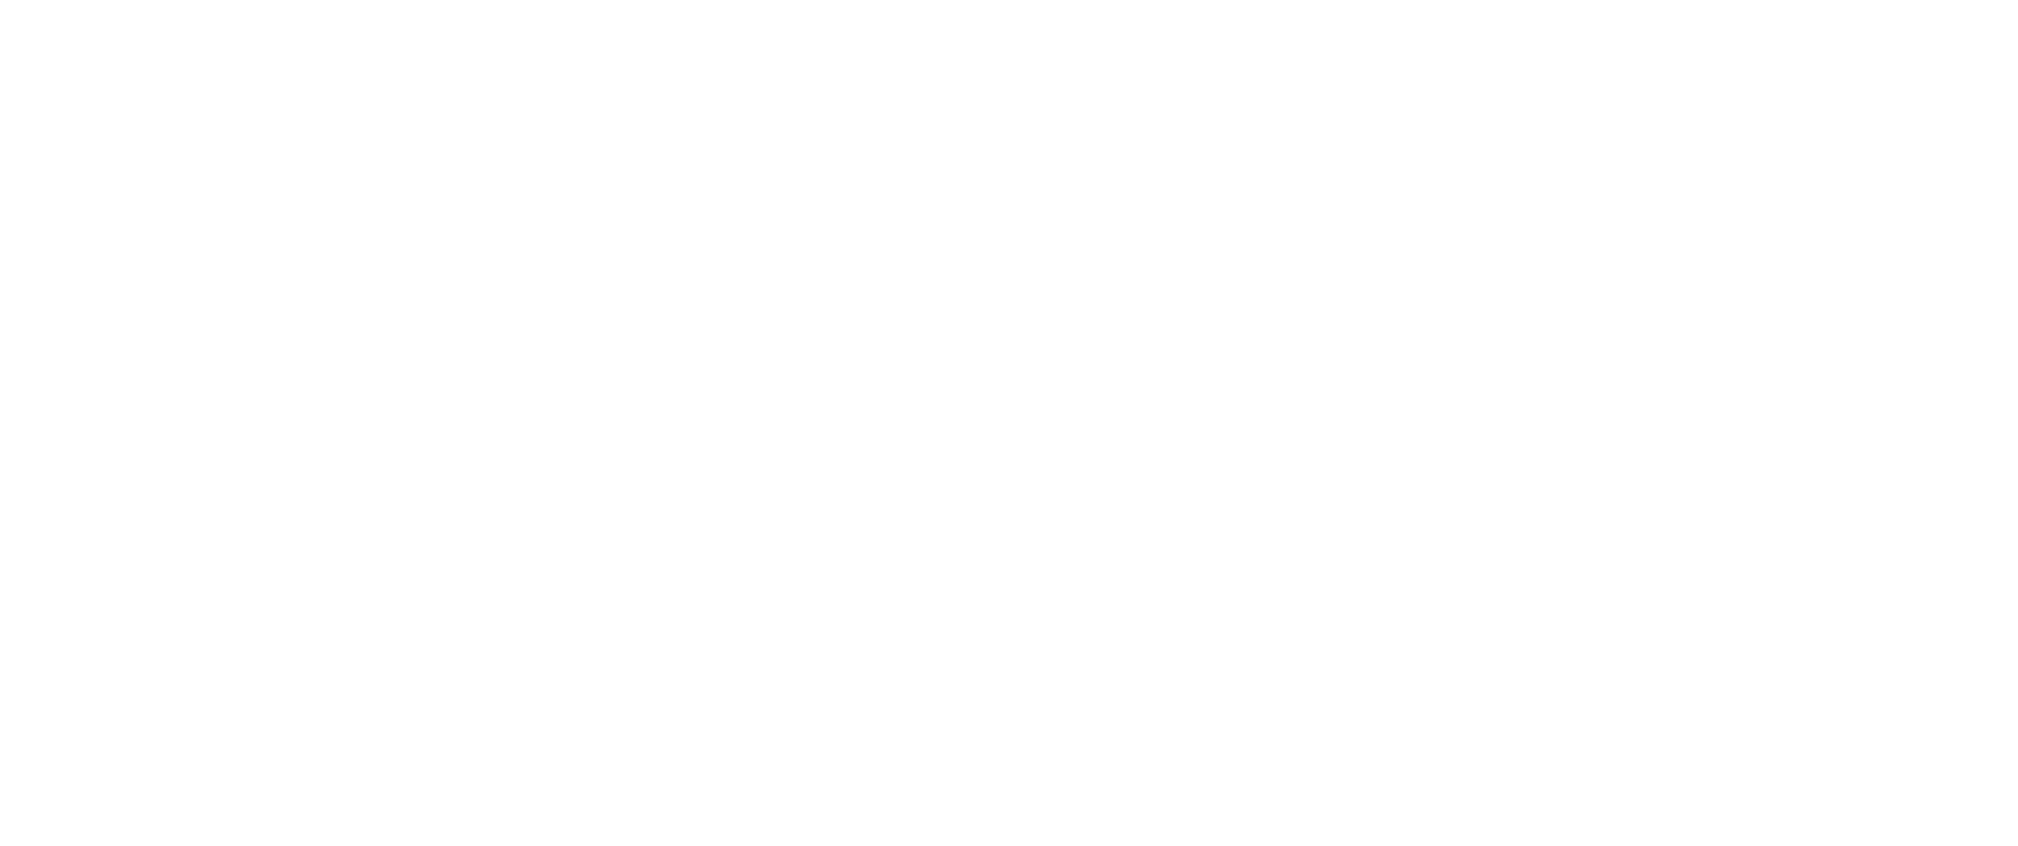 Ready to be the change?